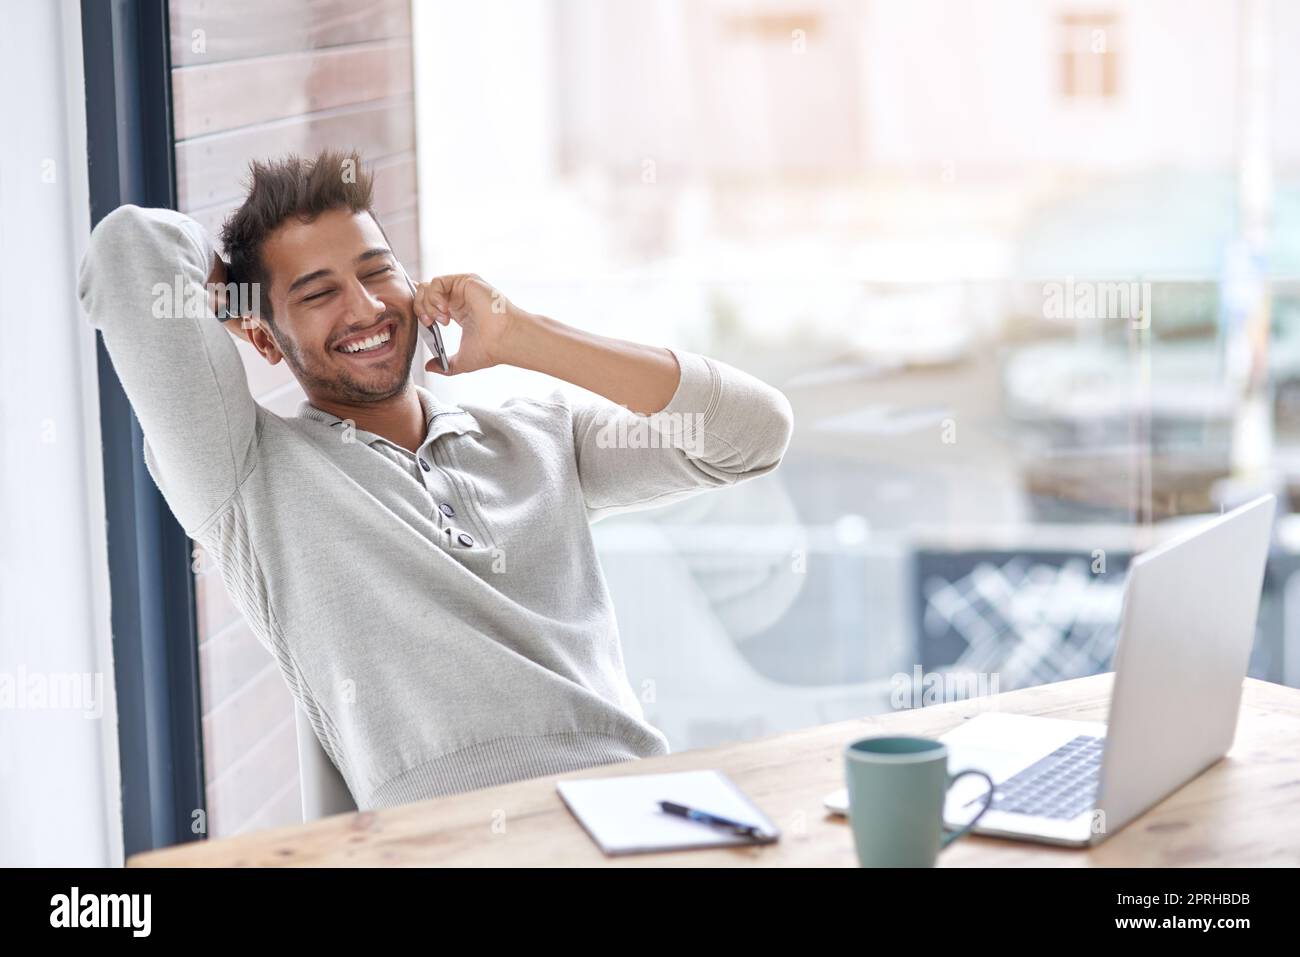 Happy to be his own boss. a young entrepreneur speaking on his cellphone in his office. Stock Photo